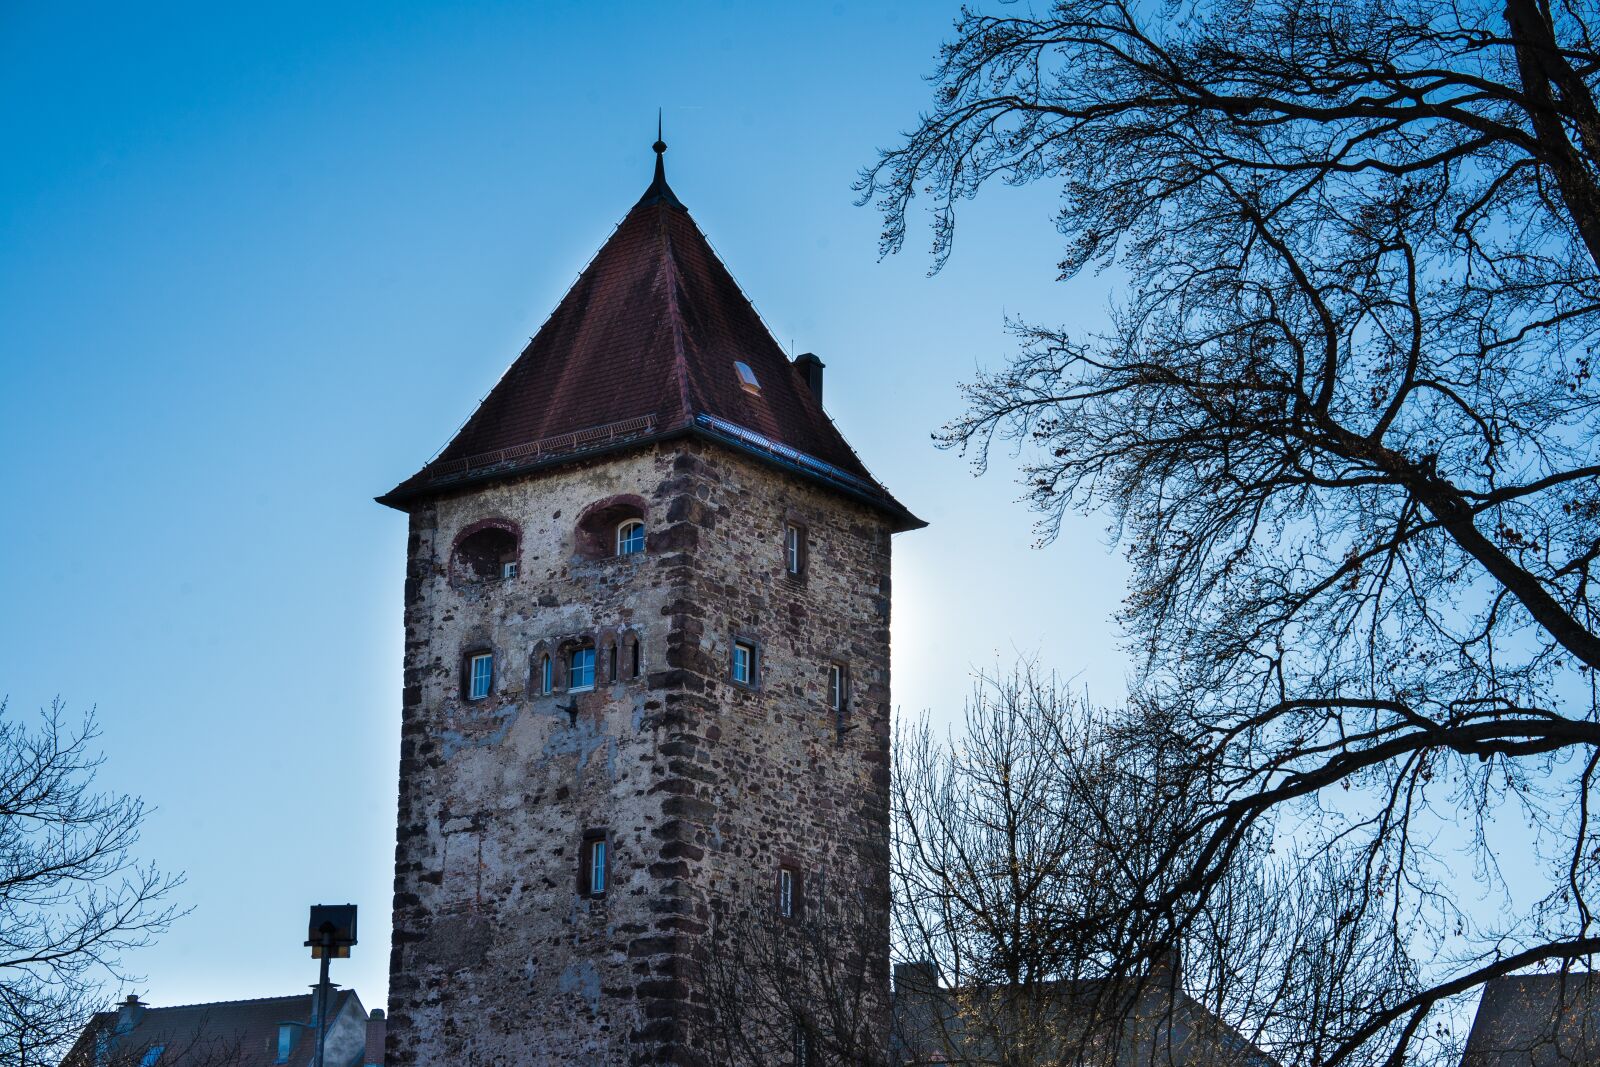 Sony a7 II sample photo. Tower, middle ages, castle photography